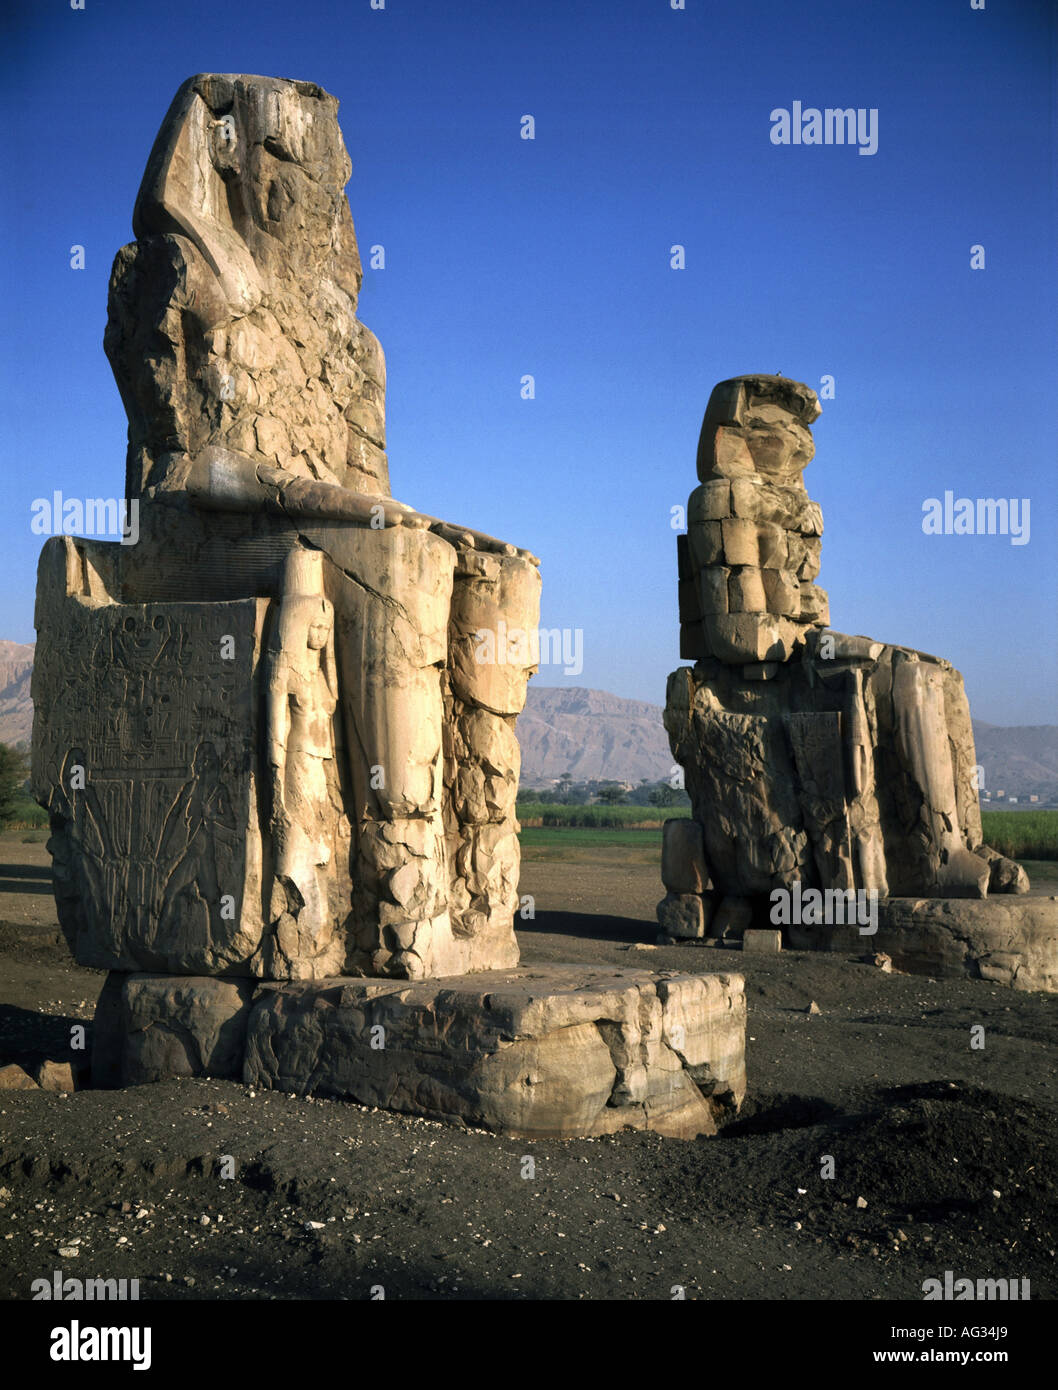 travel /geography, Egypt, Thebes, monuments, Colossi of Memnon, circa 1381 - 1351 B.C., historic, historical, Africa, architecture, monument, ancient world, New Kingdom, 18th dynasty, 14th century B.C., pharaoh Amenhotep III, queen Teje, colossus,UNESCO World Cultural Heritage Site, ancient world, Stock Photo